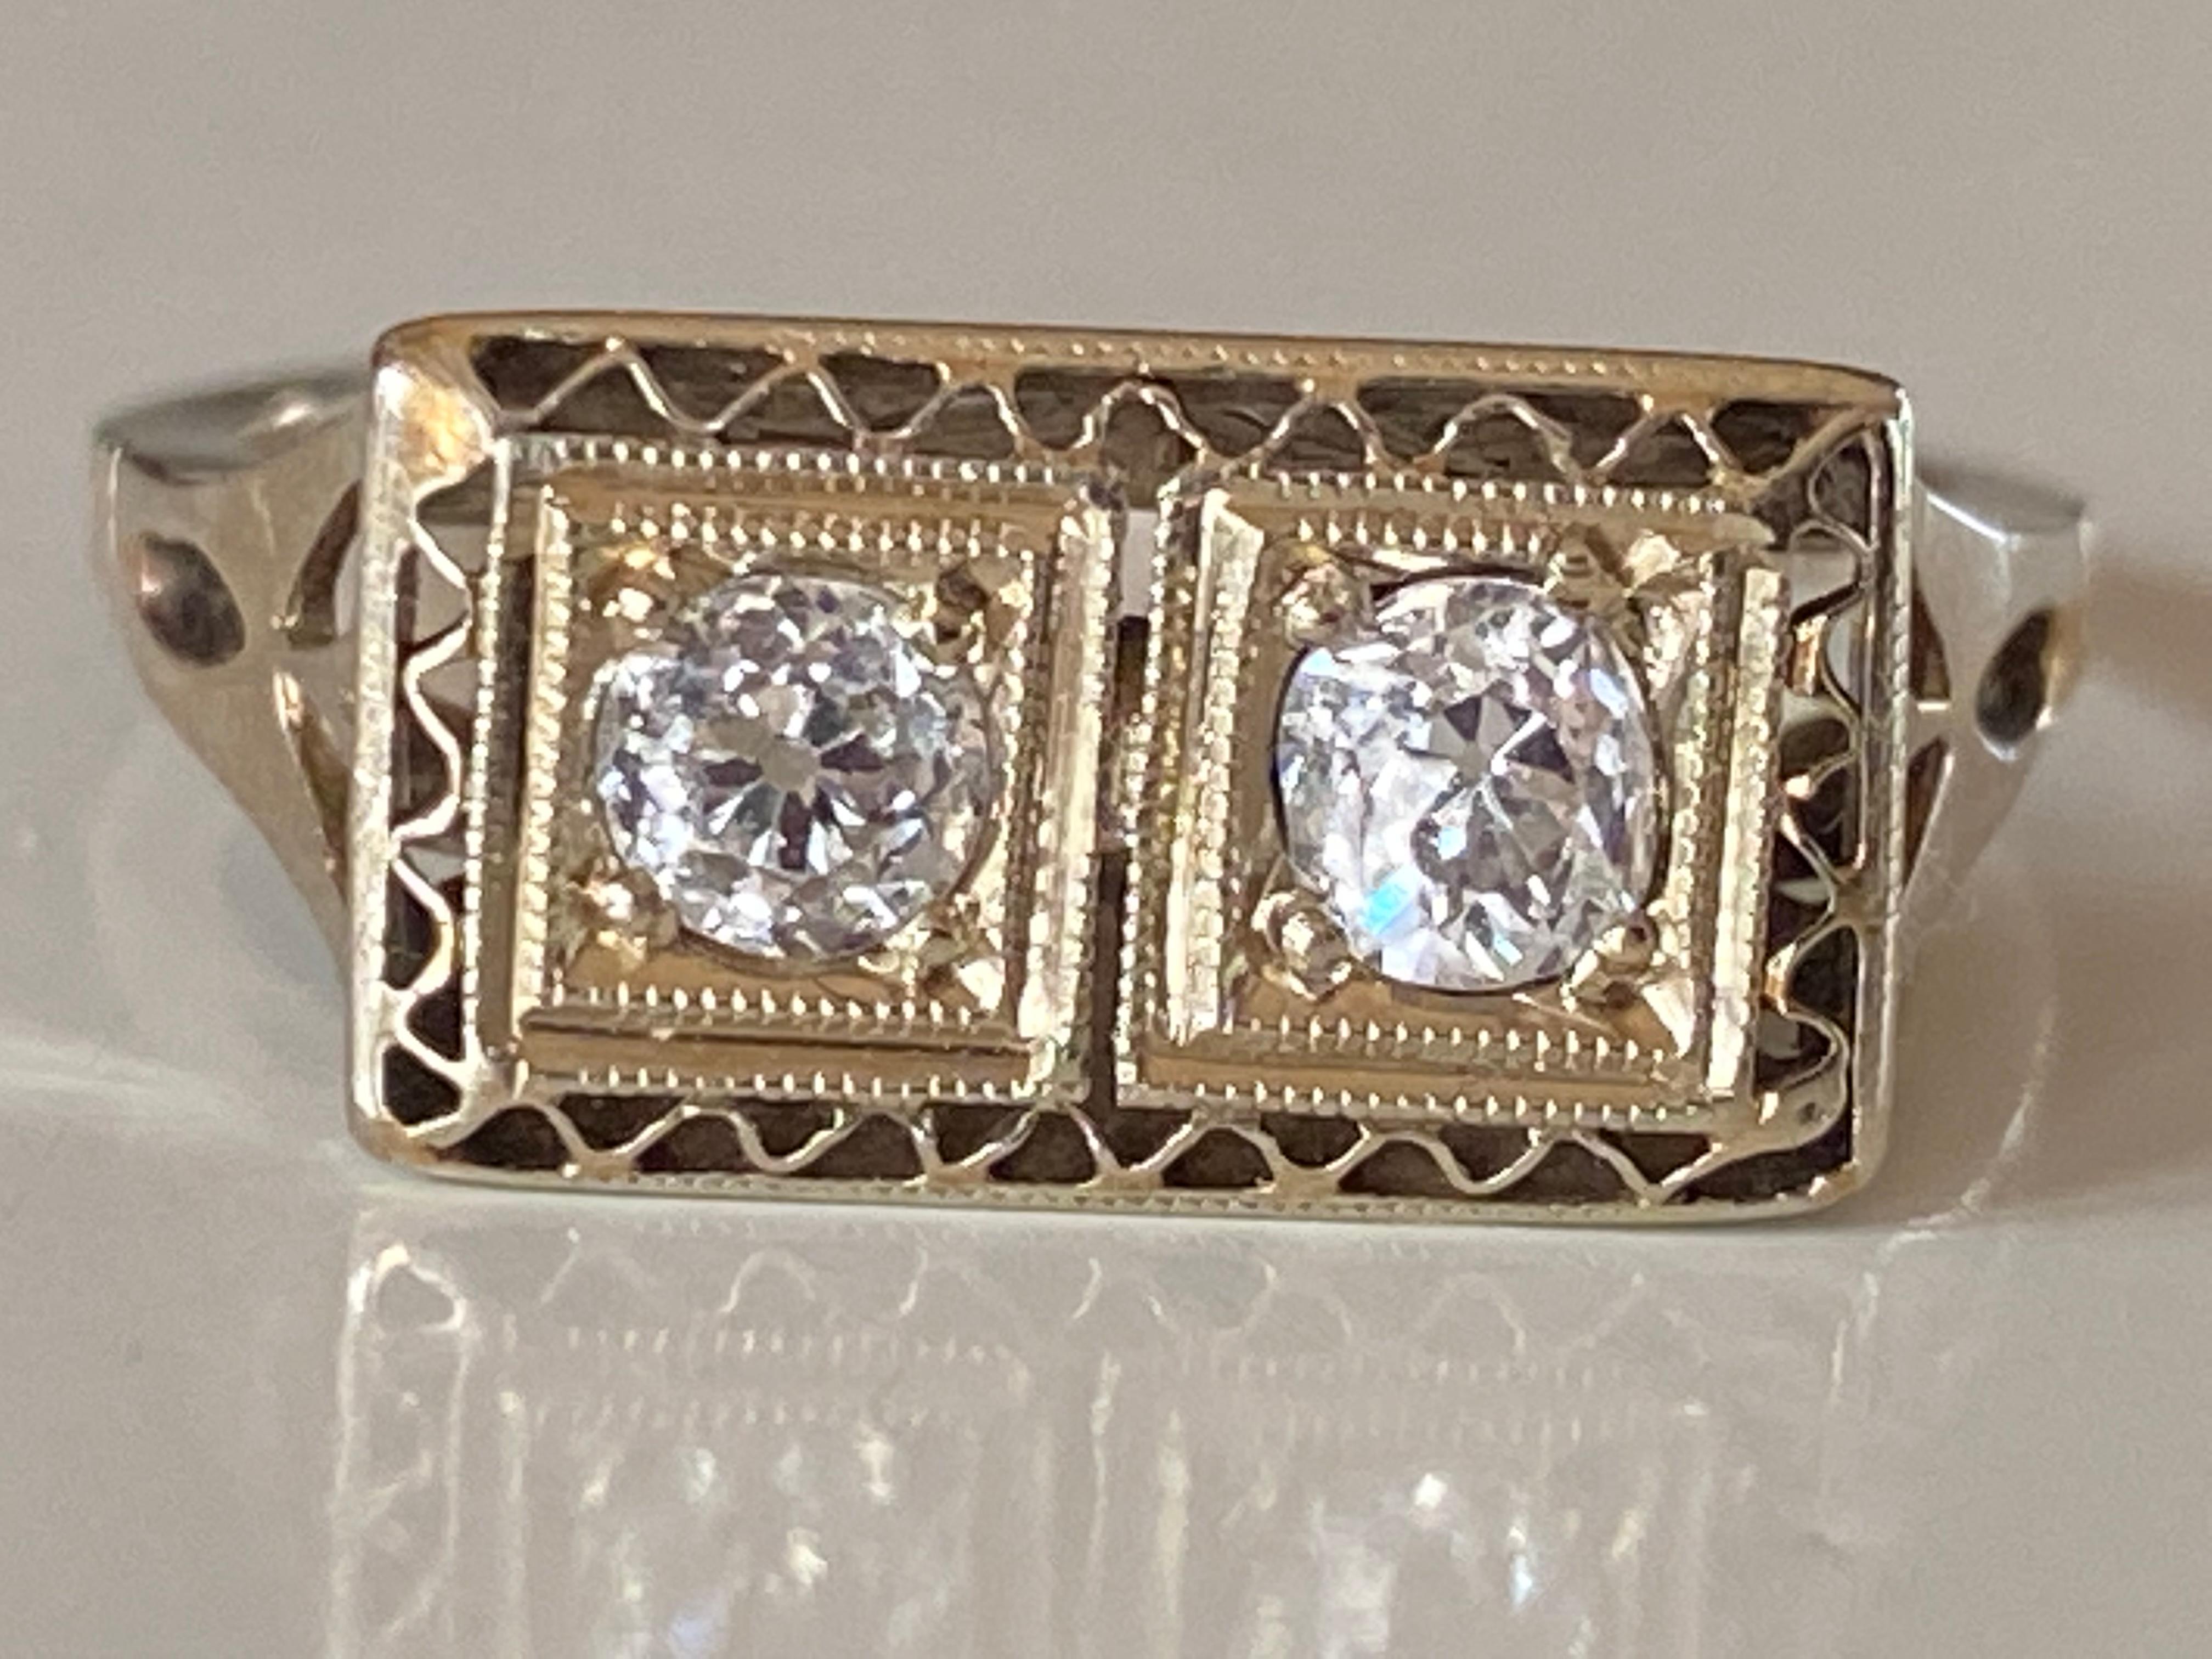 This antique Art Deco ring handcrafted in 14kt white gold features two Old European cut diamonds measuring approximately 0.20 carats each, F color, SI1 clarity, placed side by side and encased in two square frames with delicate milgraining and